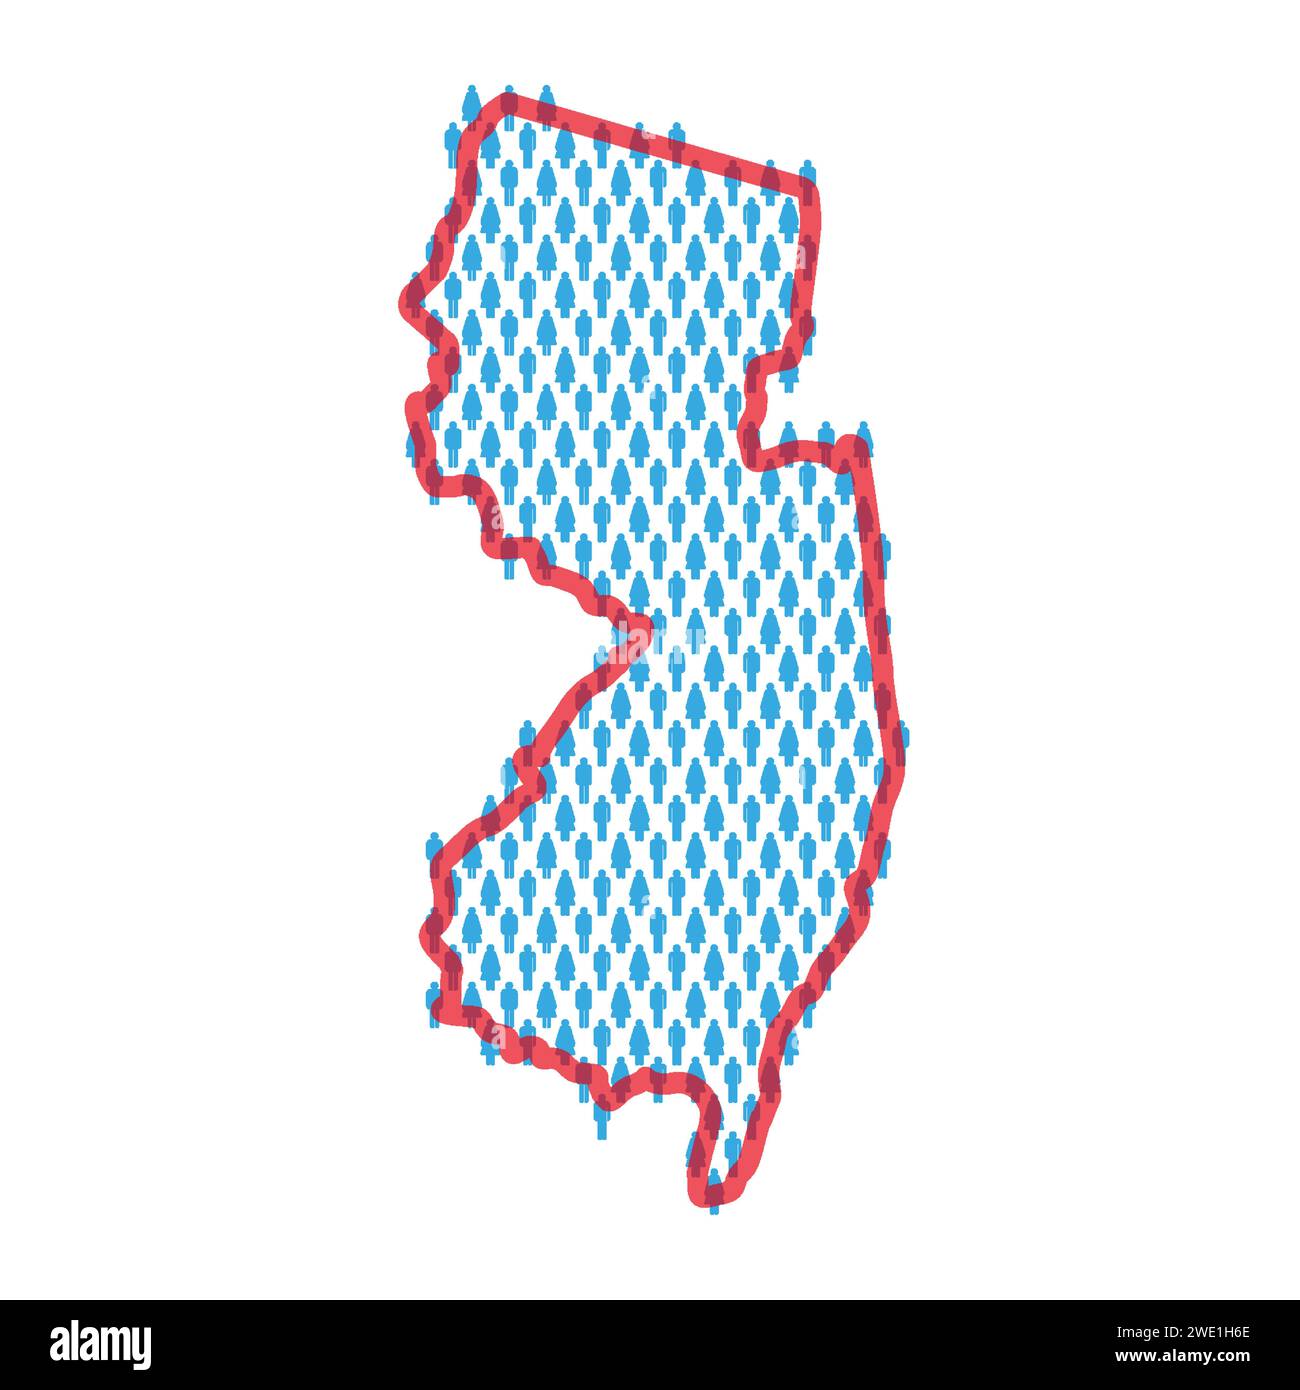 New Jersey population map. Stick figures people map with bold red translucent state border. Pattern of men and women icons. Isolated vector illustrati Stock Vector